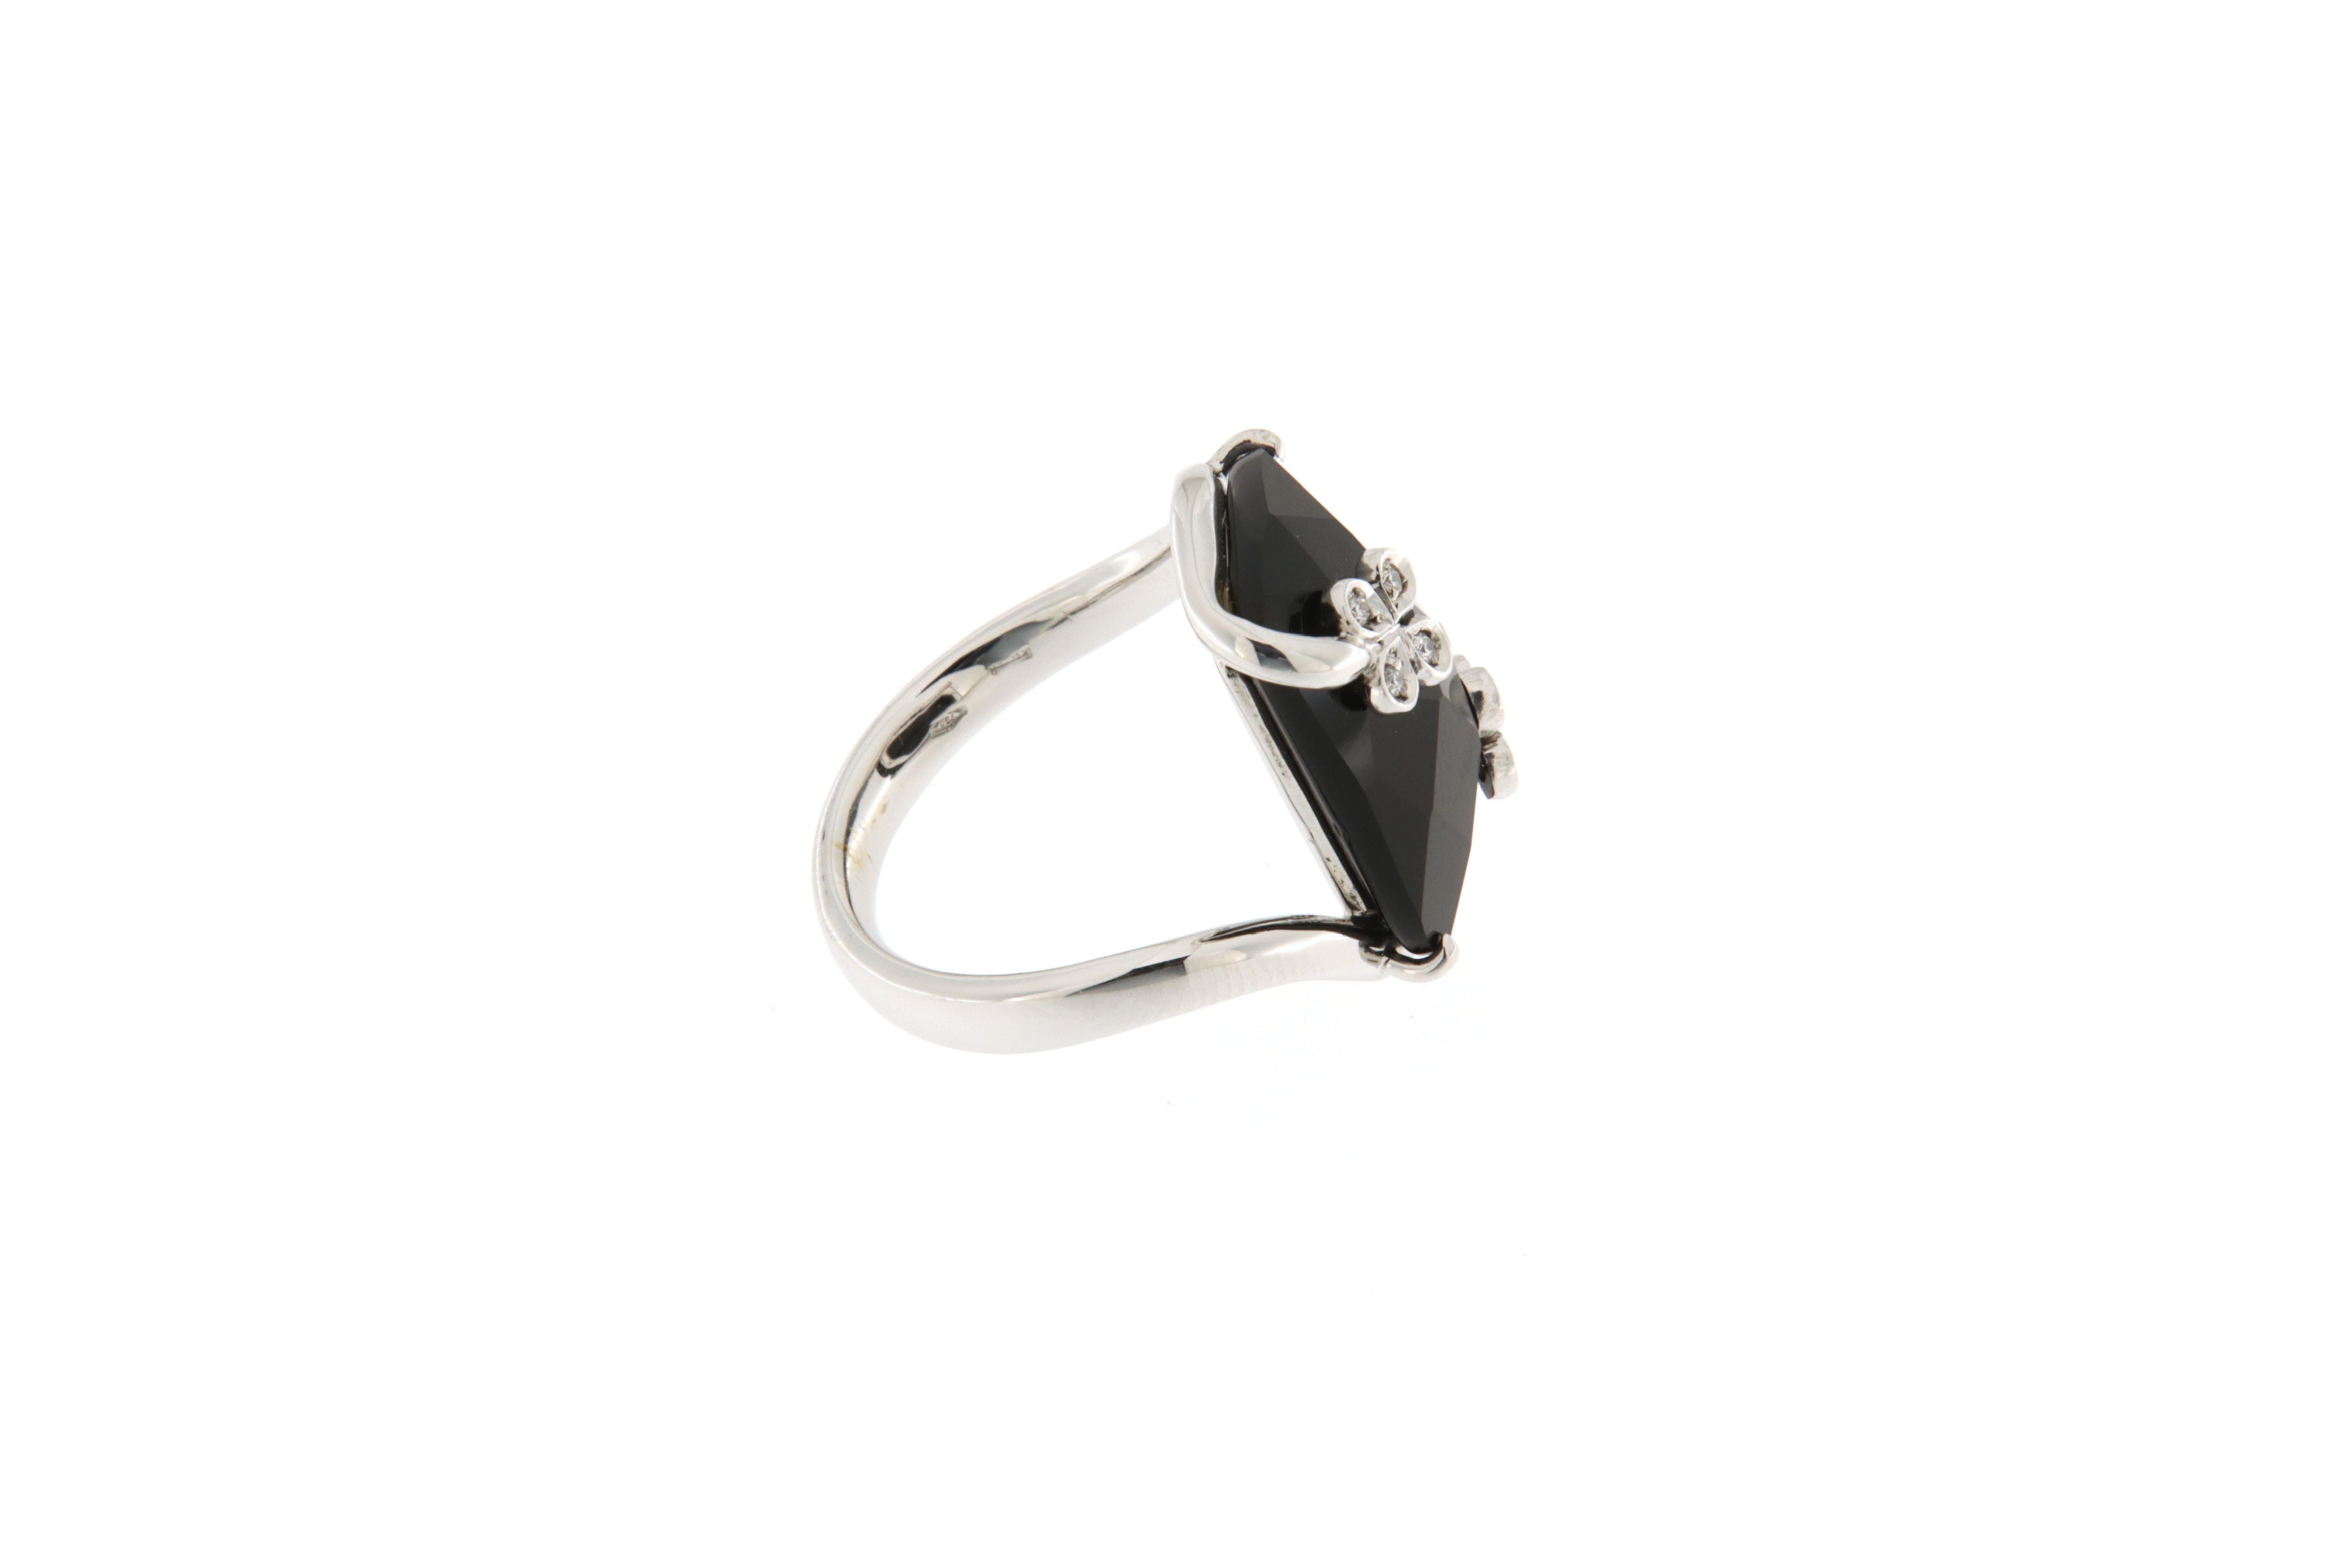 This ring was handmade by Italian goldsmiths by mounting a rectangular onyx element as the centerpiece, faceted at the top. The design of the ring hugs the shape of the finger, creating two small shamrocks with diamonds that embellish the onyx,